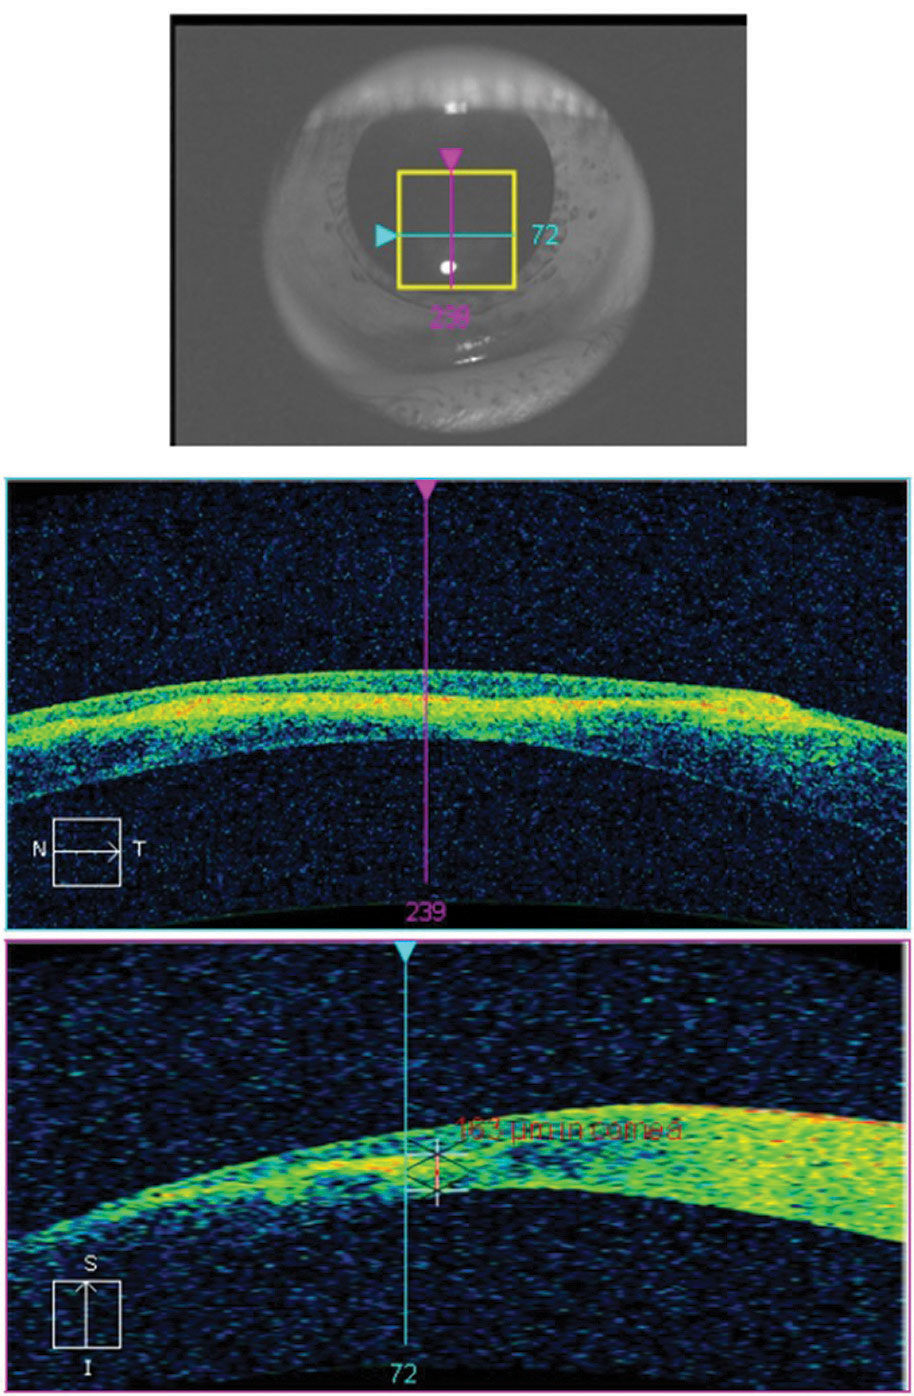 Fig. 11. This AS-OCT scan of a 28-year-old Asian patient with advanced keratoconus and moderate-to-severe pain demonstrates intact endothelial and posterior stromal layers while showing increased reflectivity associated with stromal scarring. In this case, AS-OCT confirmed an intact endothelium and Descemet’s membrane. As an added advantage, corneal thickness was measured accurately at the thinnest location using the caliper tool, thereby providing a reliable baseline for follow-up comparison. In light of the anatomical state of the cornea, the patient’s symptoms were attributed to epithelial disruption overlying the apex of corneal steepening. 